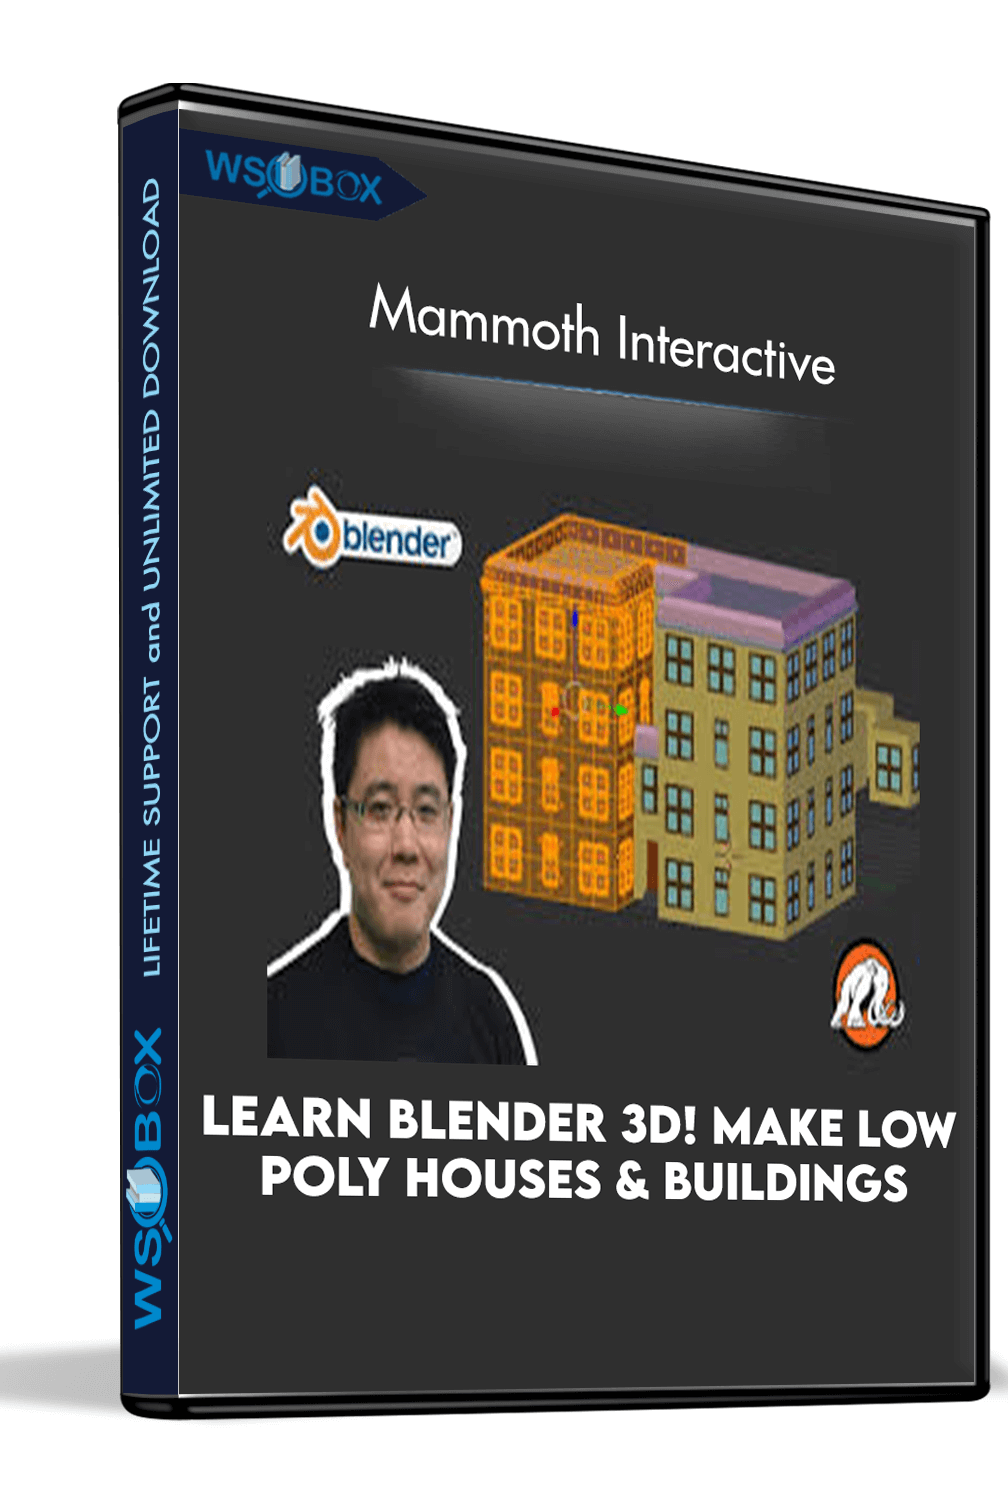 Learn Blender 3D! Make Low Poly Houses & Buildings – Mammoth Interactive